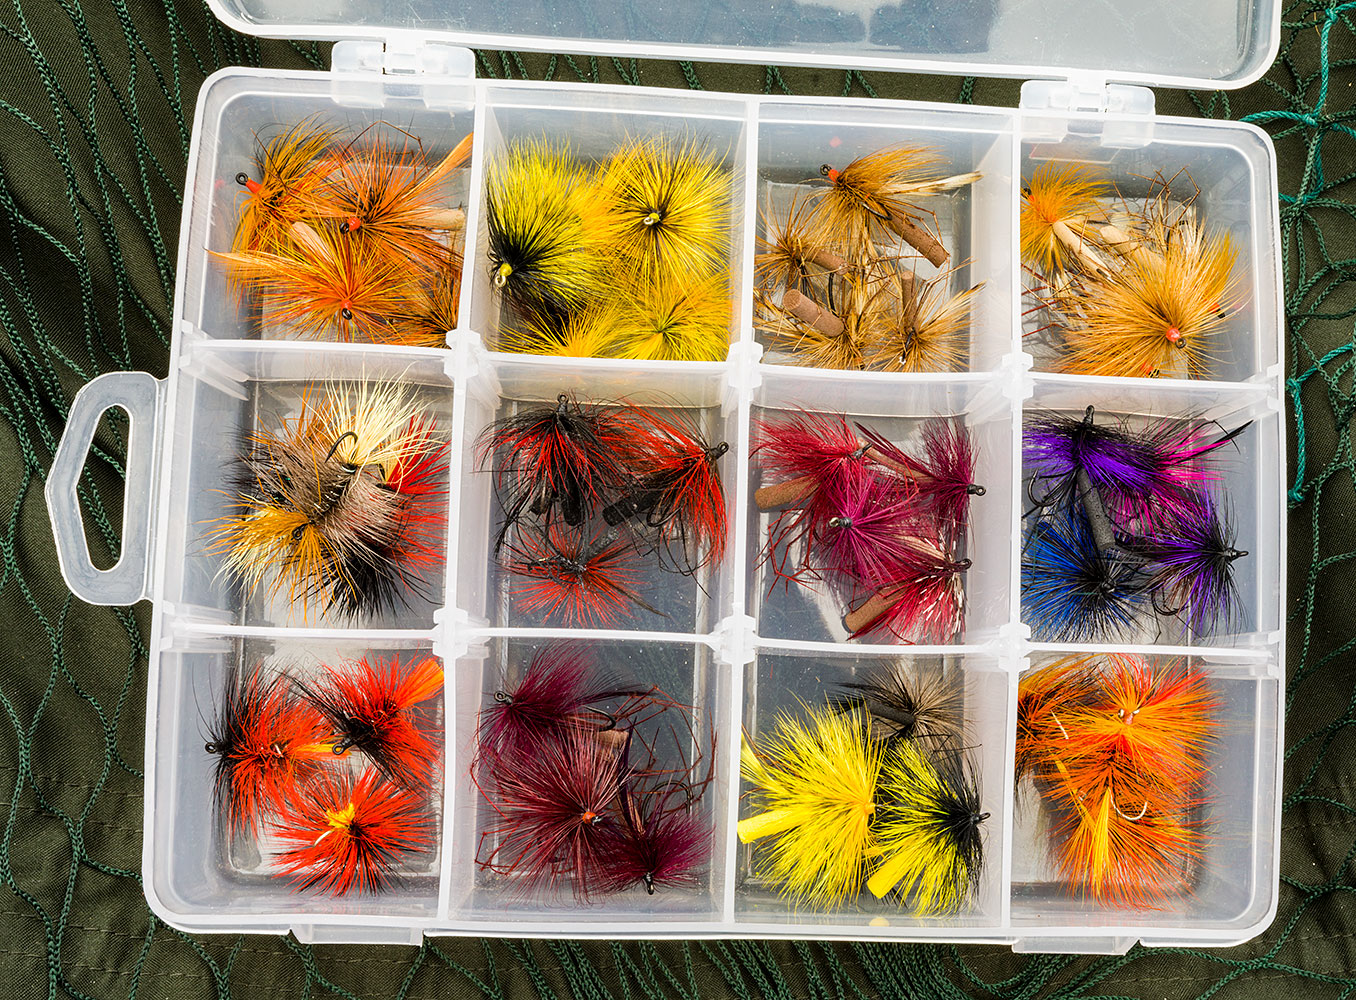 Fly box recommendations?